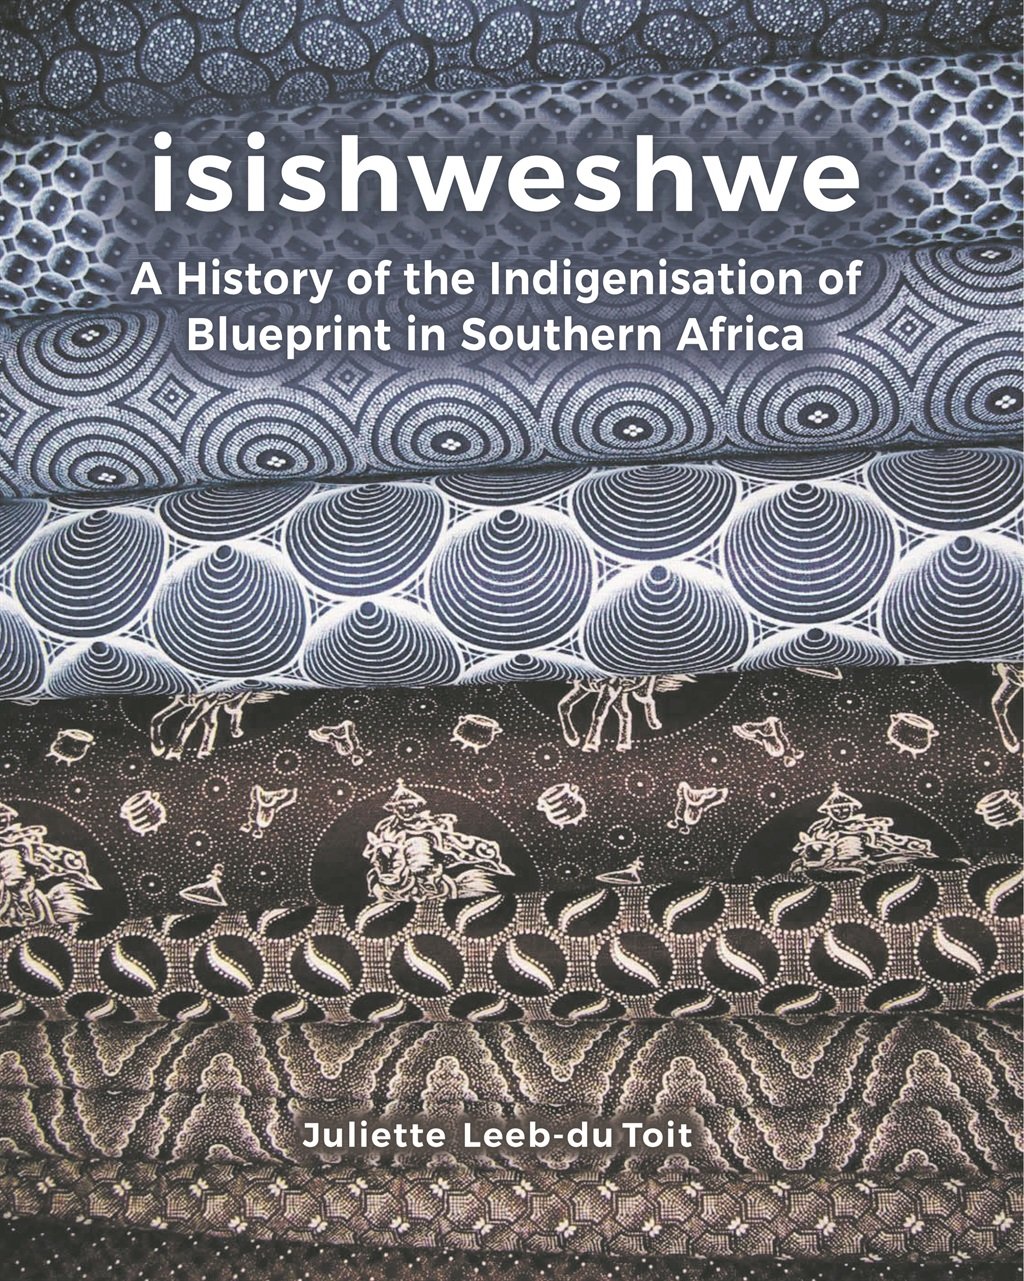 isiShweshwe: A History of the Indigenisation of Blueprint in Southern Africa is published through UKZN Press. The recommended retail price is R895. Picture: Supplied